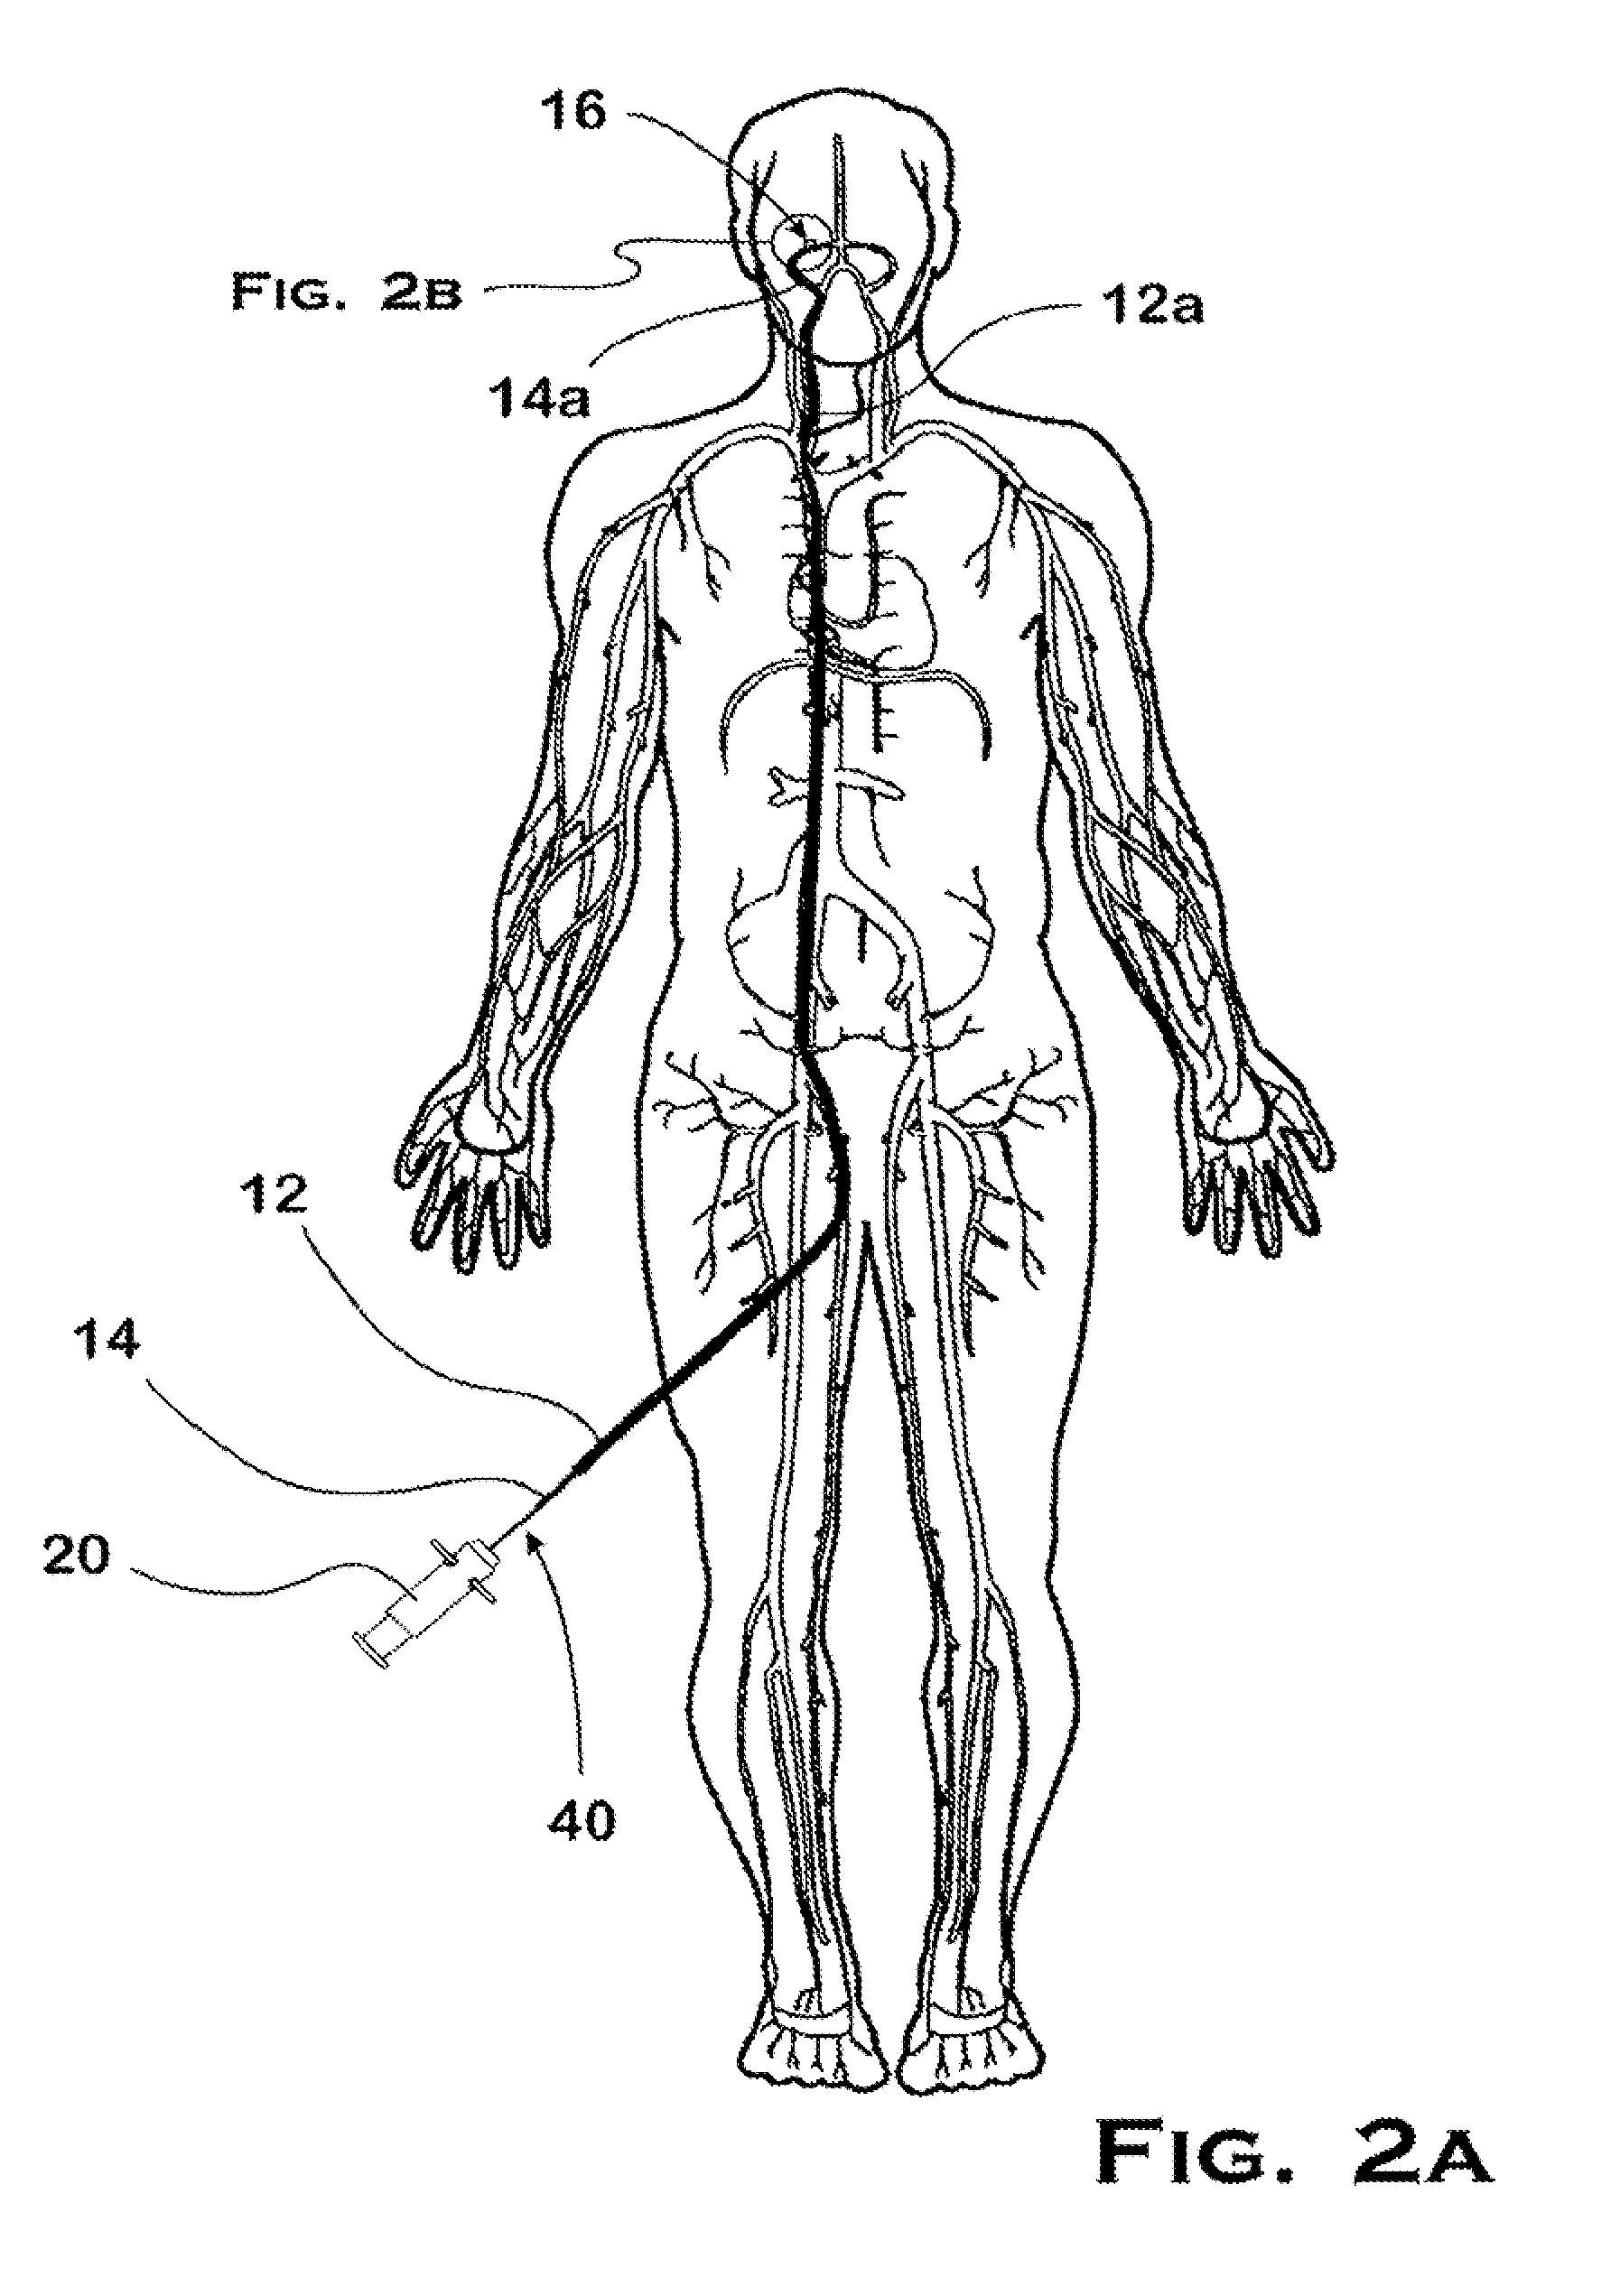 System and method for mechanically positioning intravascular implants